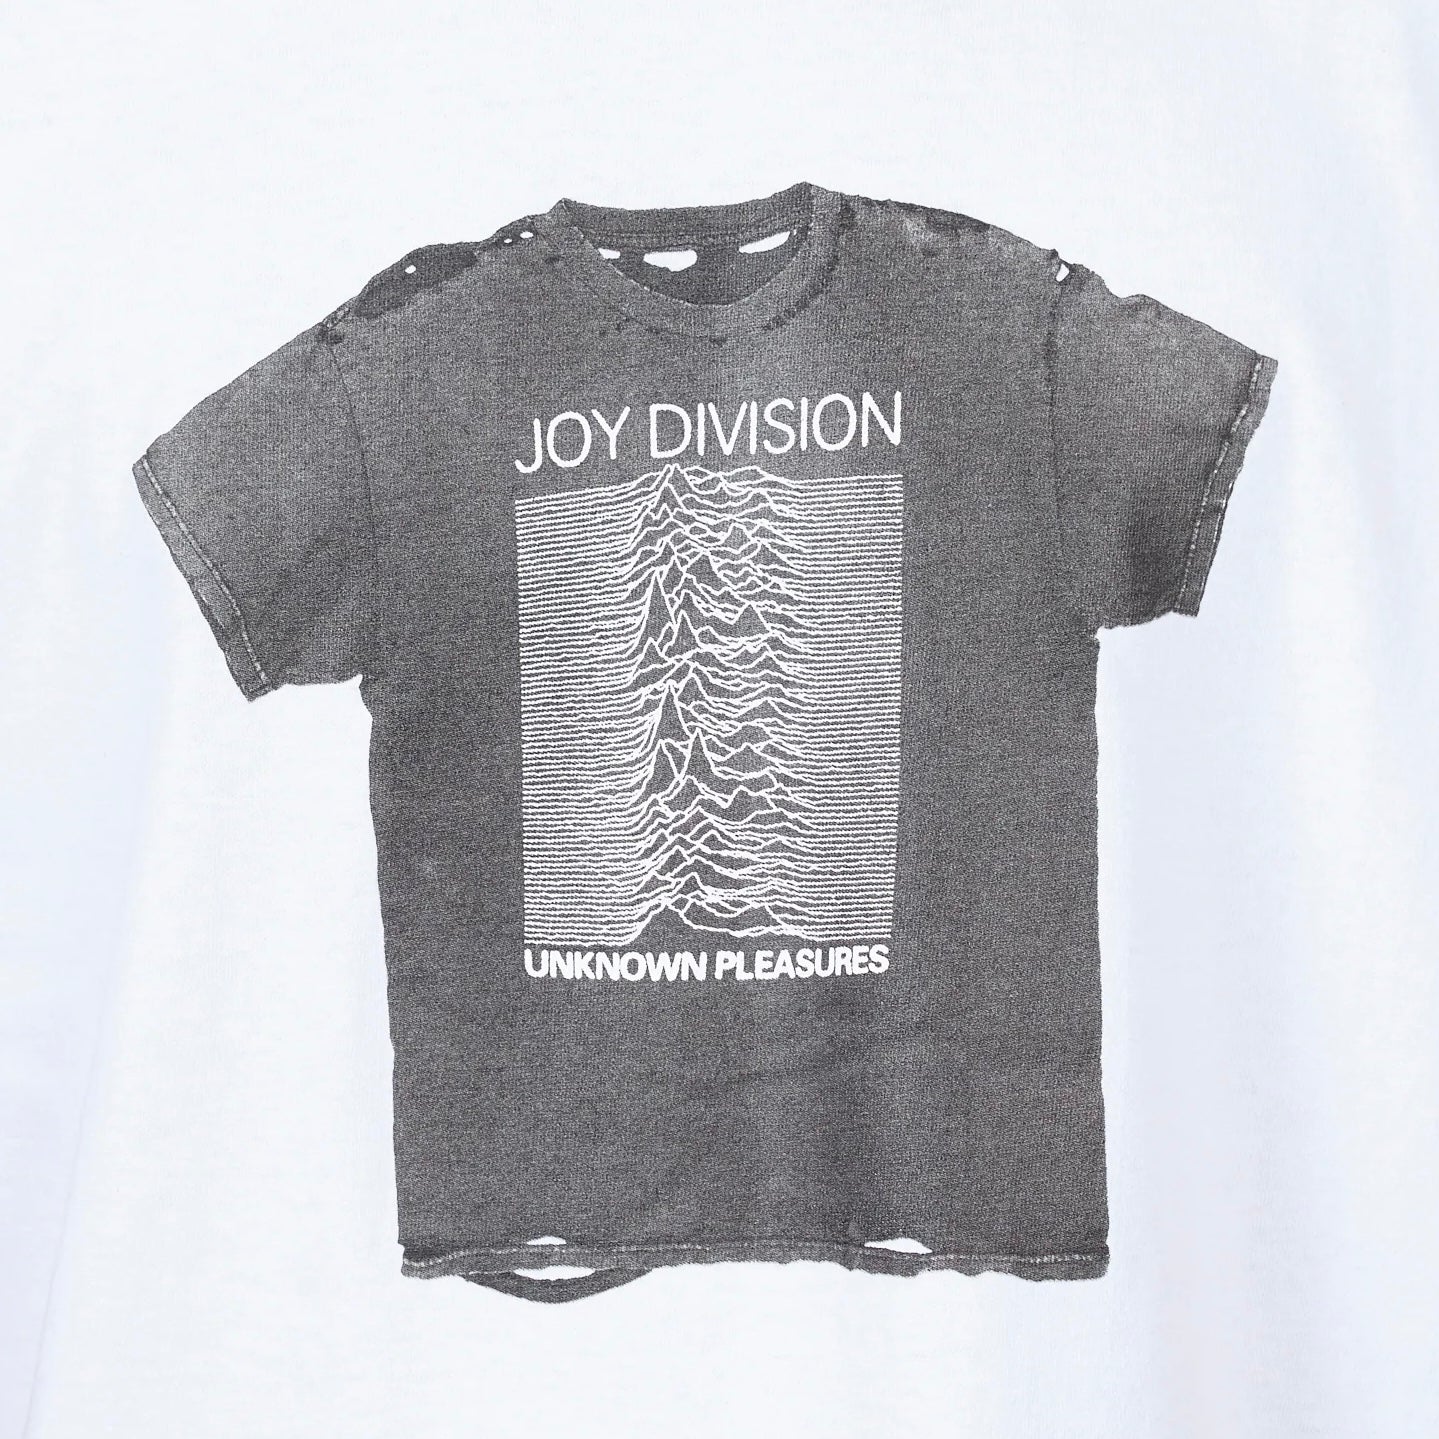 Gray cotton PLEASURES "unknown pleasures" t-shirt with distressed detailing on a white background.